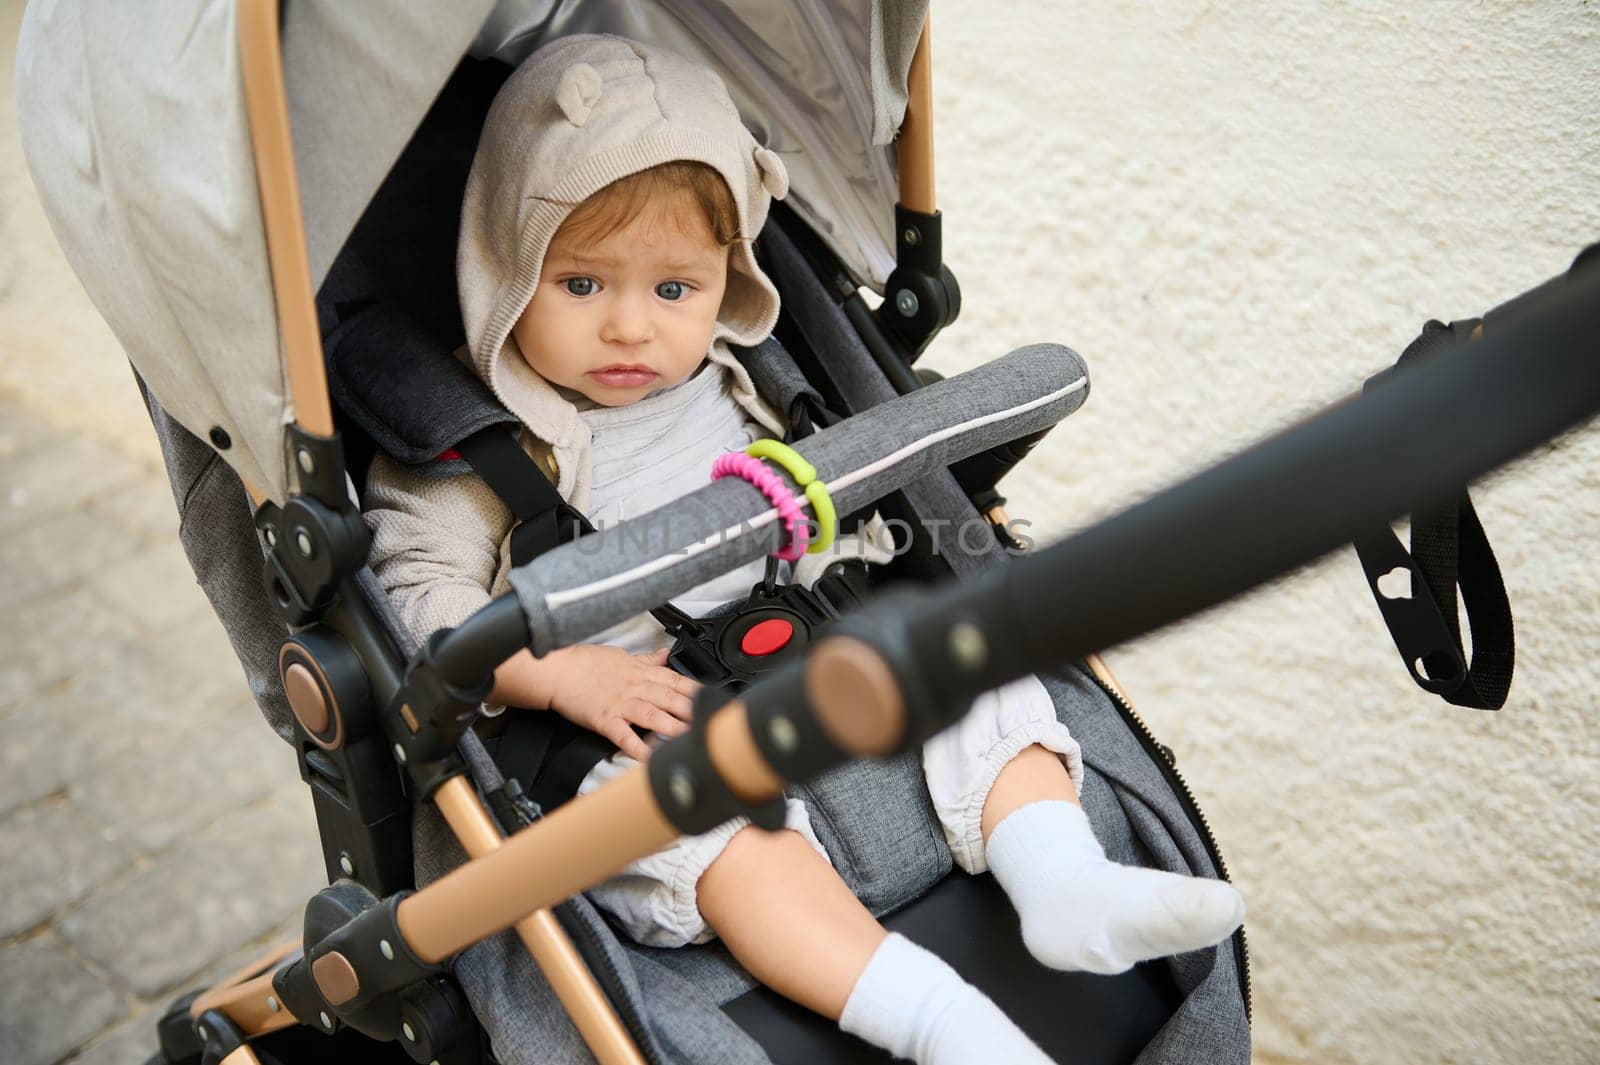 A cute baby boy in the baby pram, baby stroller, pushchair during a family walk outdoors by artgf